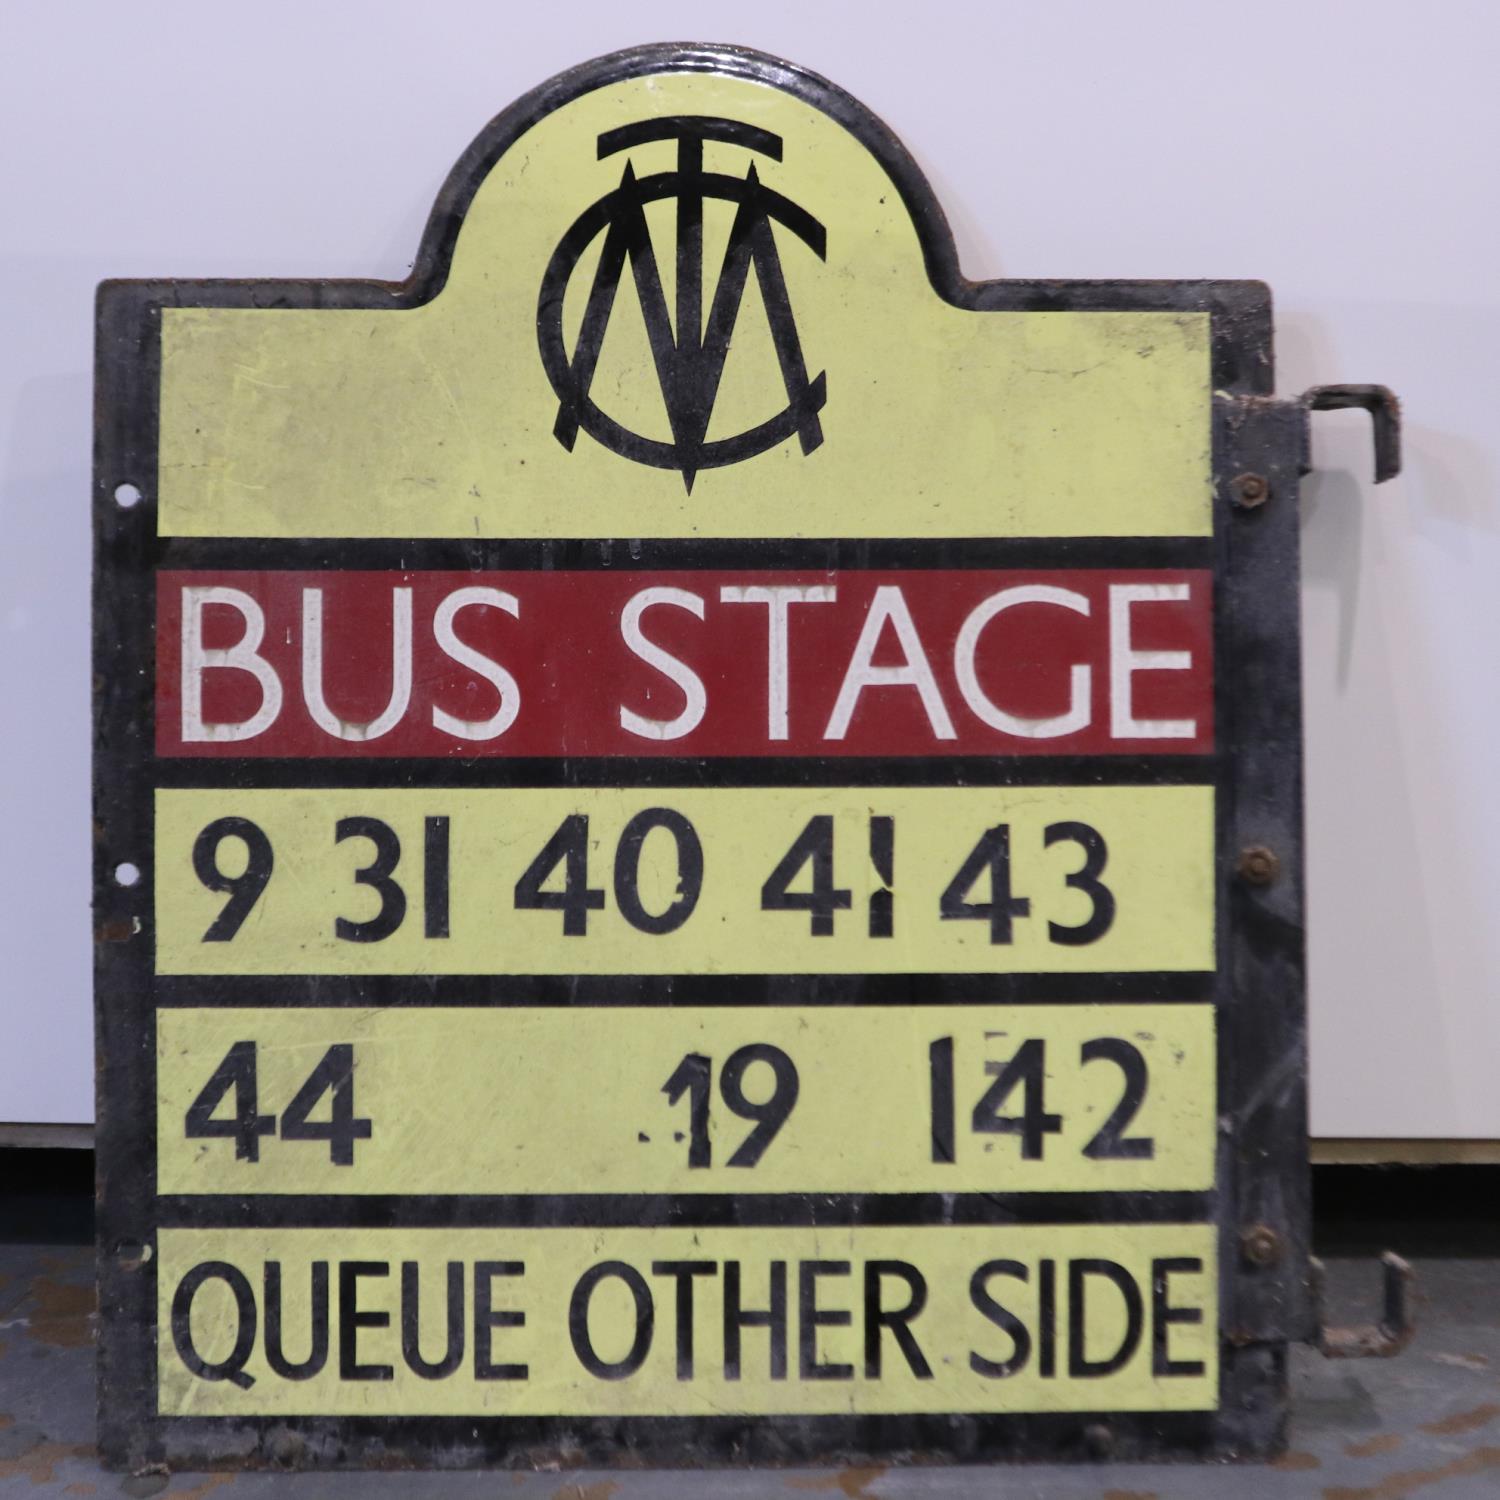 Manchester corporation transport bus stop sign, 9,31, 40 and 41 main stop numbers, H: 58 cm. Not